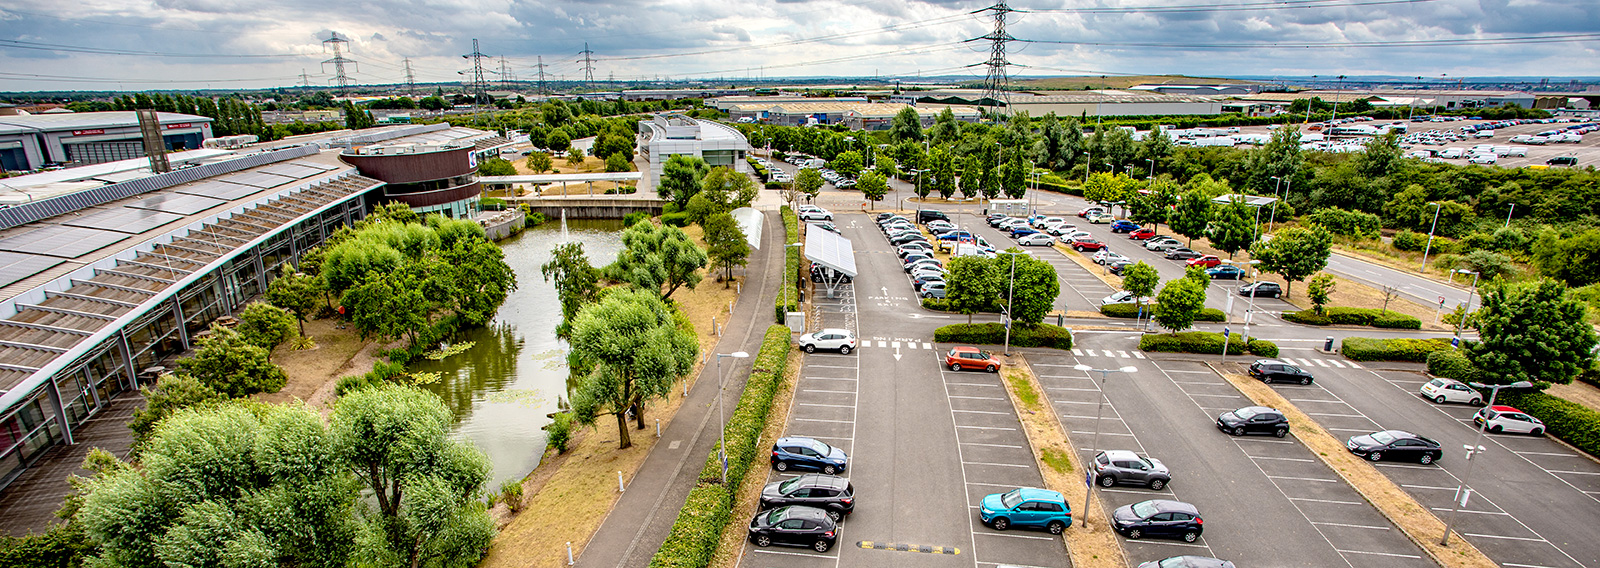 An aerial view of the CEME campus and carpark